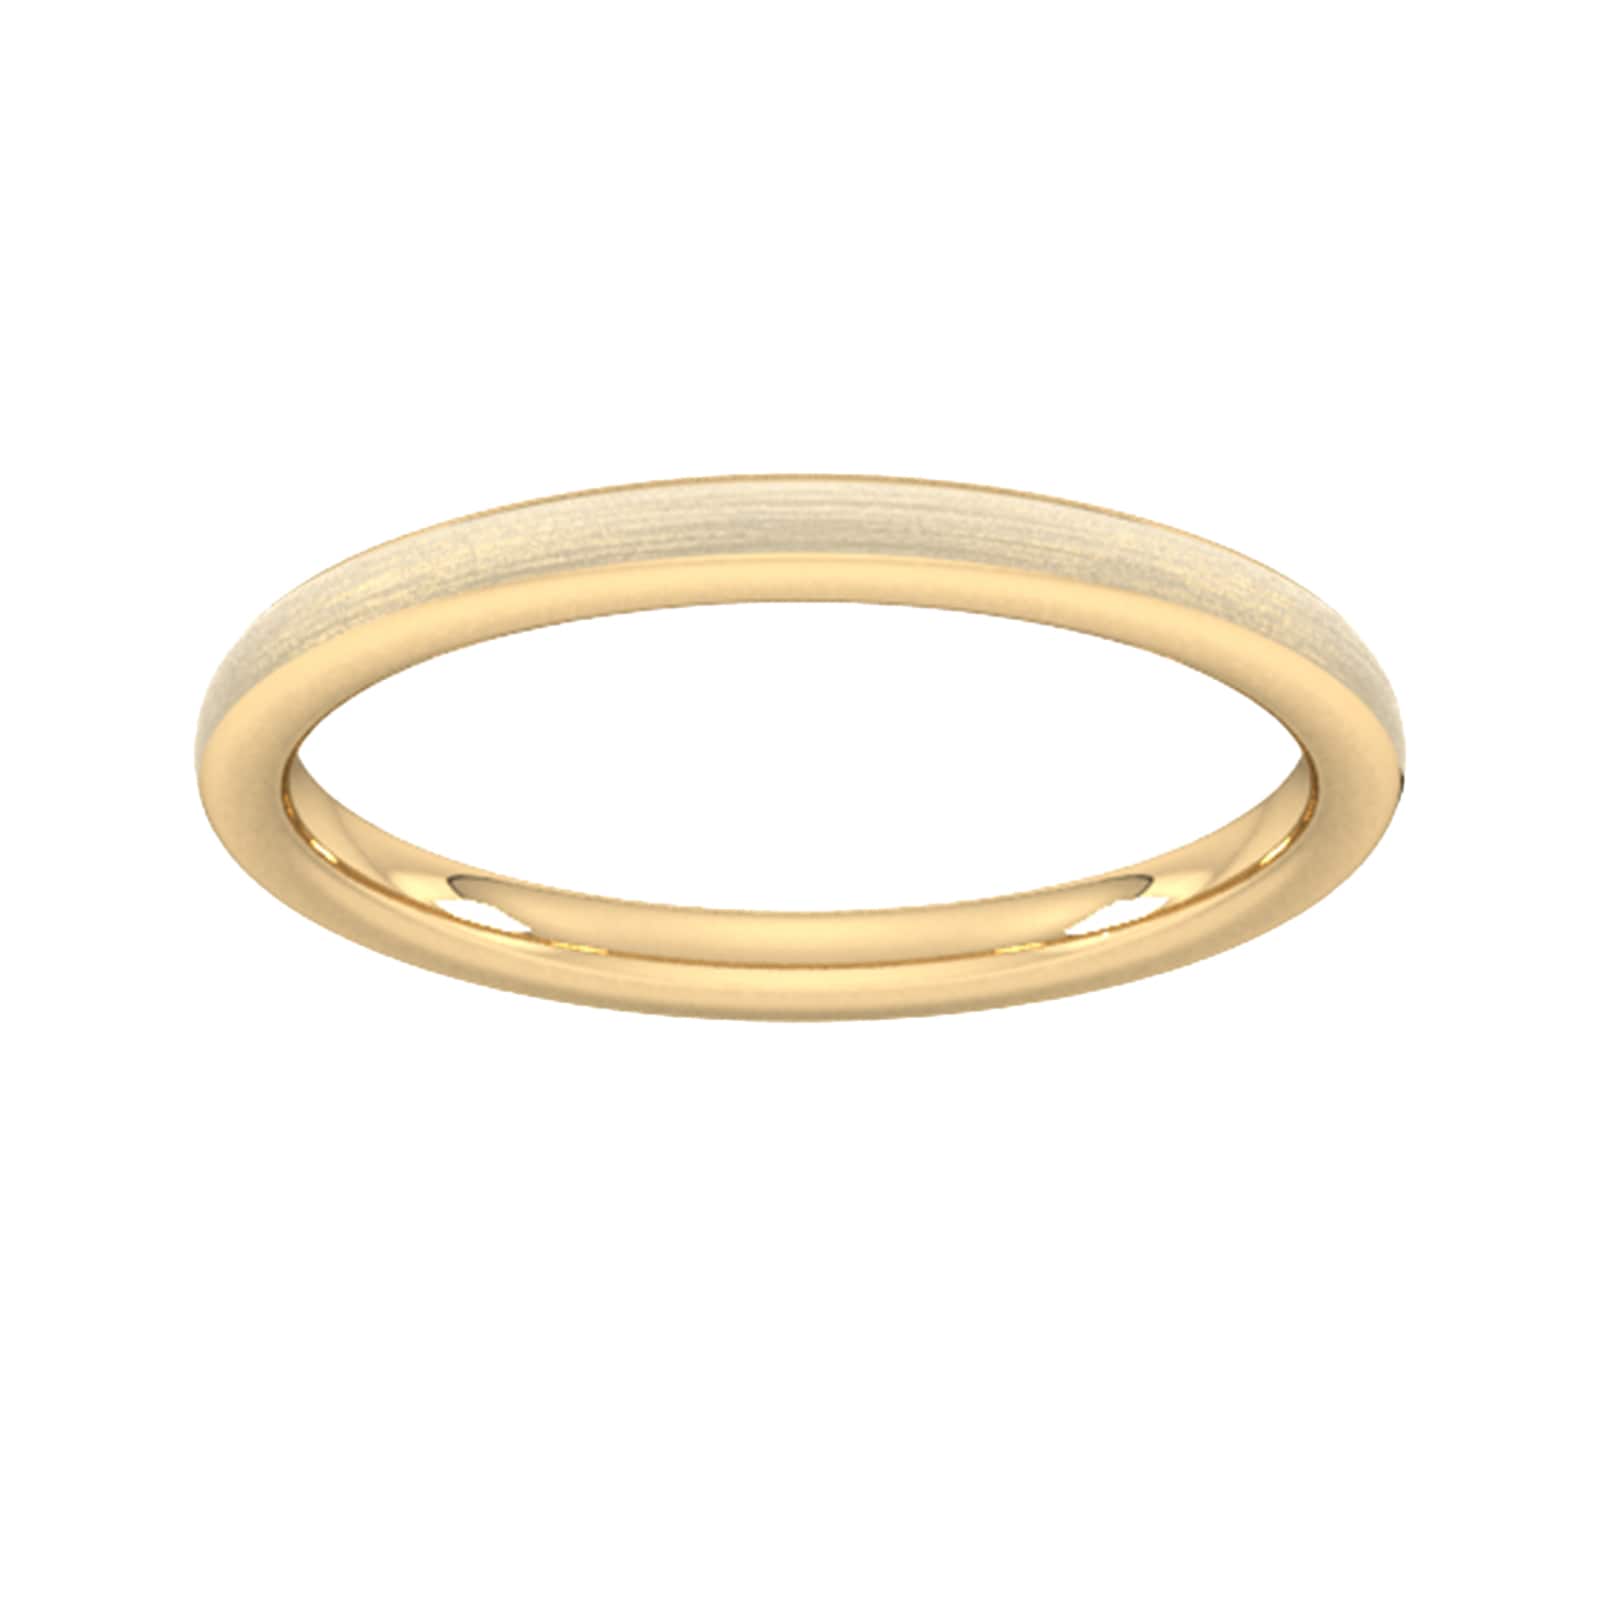 2mm Traditional Court Heavy Matt Finished Wedding Ring In 18 Carat Yellow Gold - Ring Size N